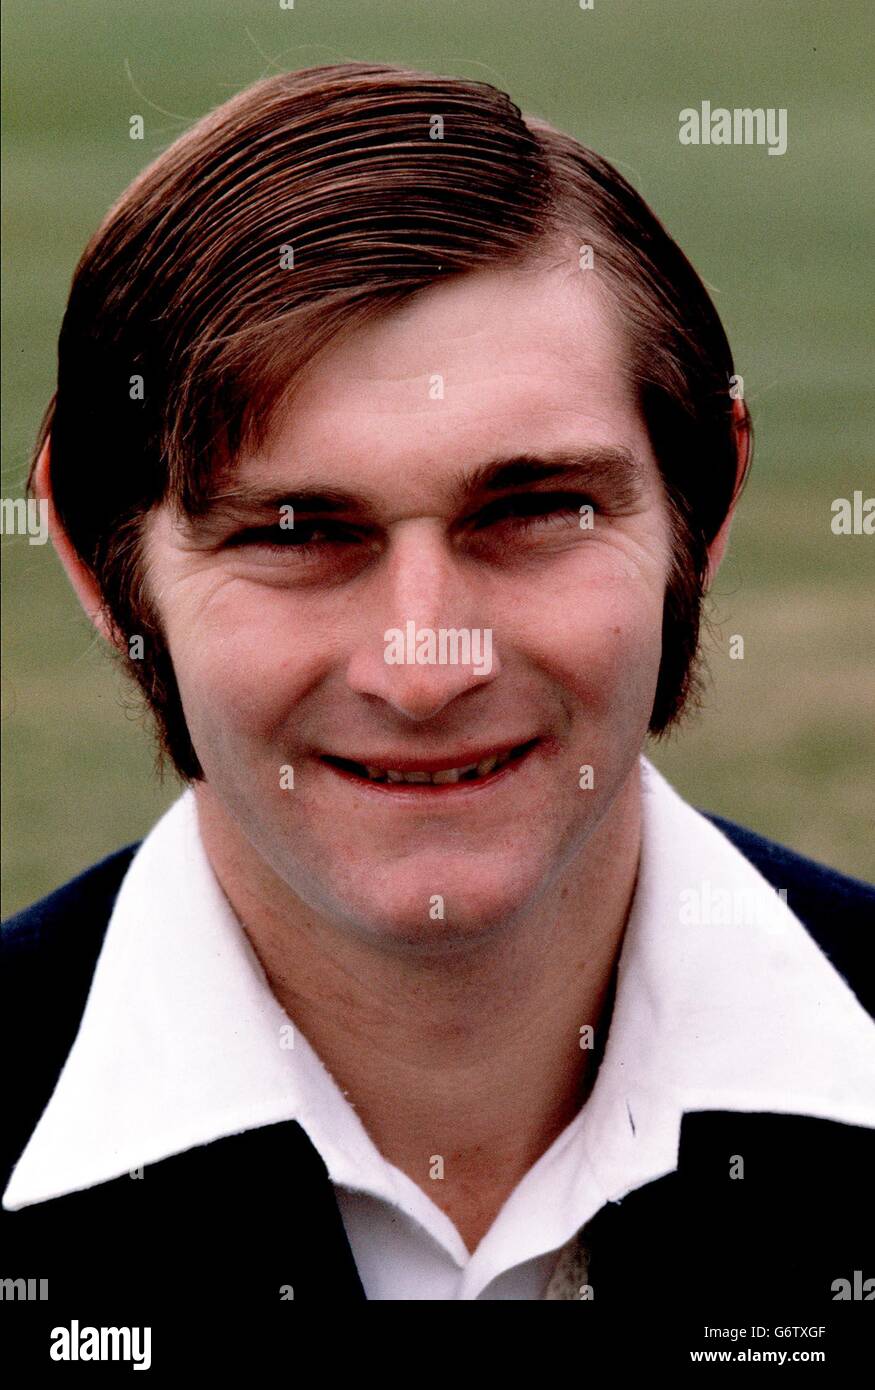 Chris Old Yorkshire. Chris Old, Cricketer dello Yorkshire, stagione 1979. Foto Stock